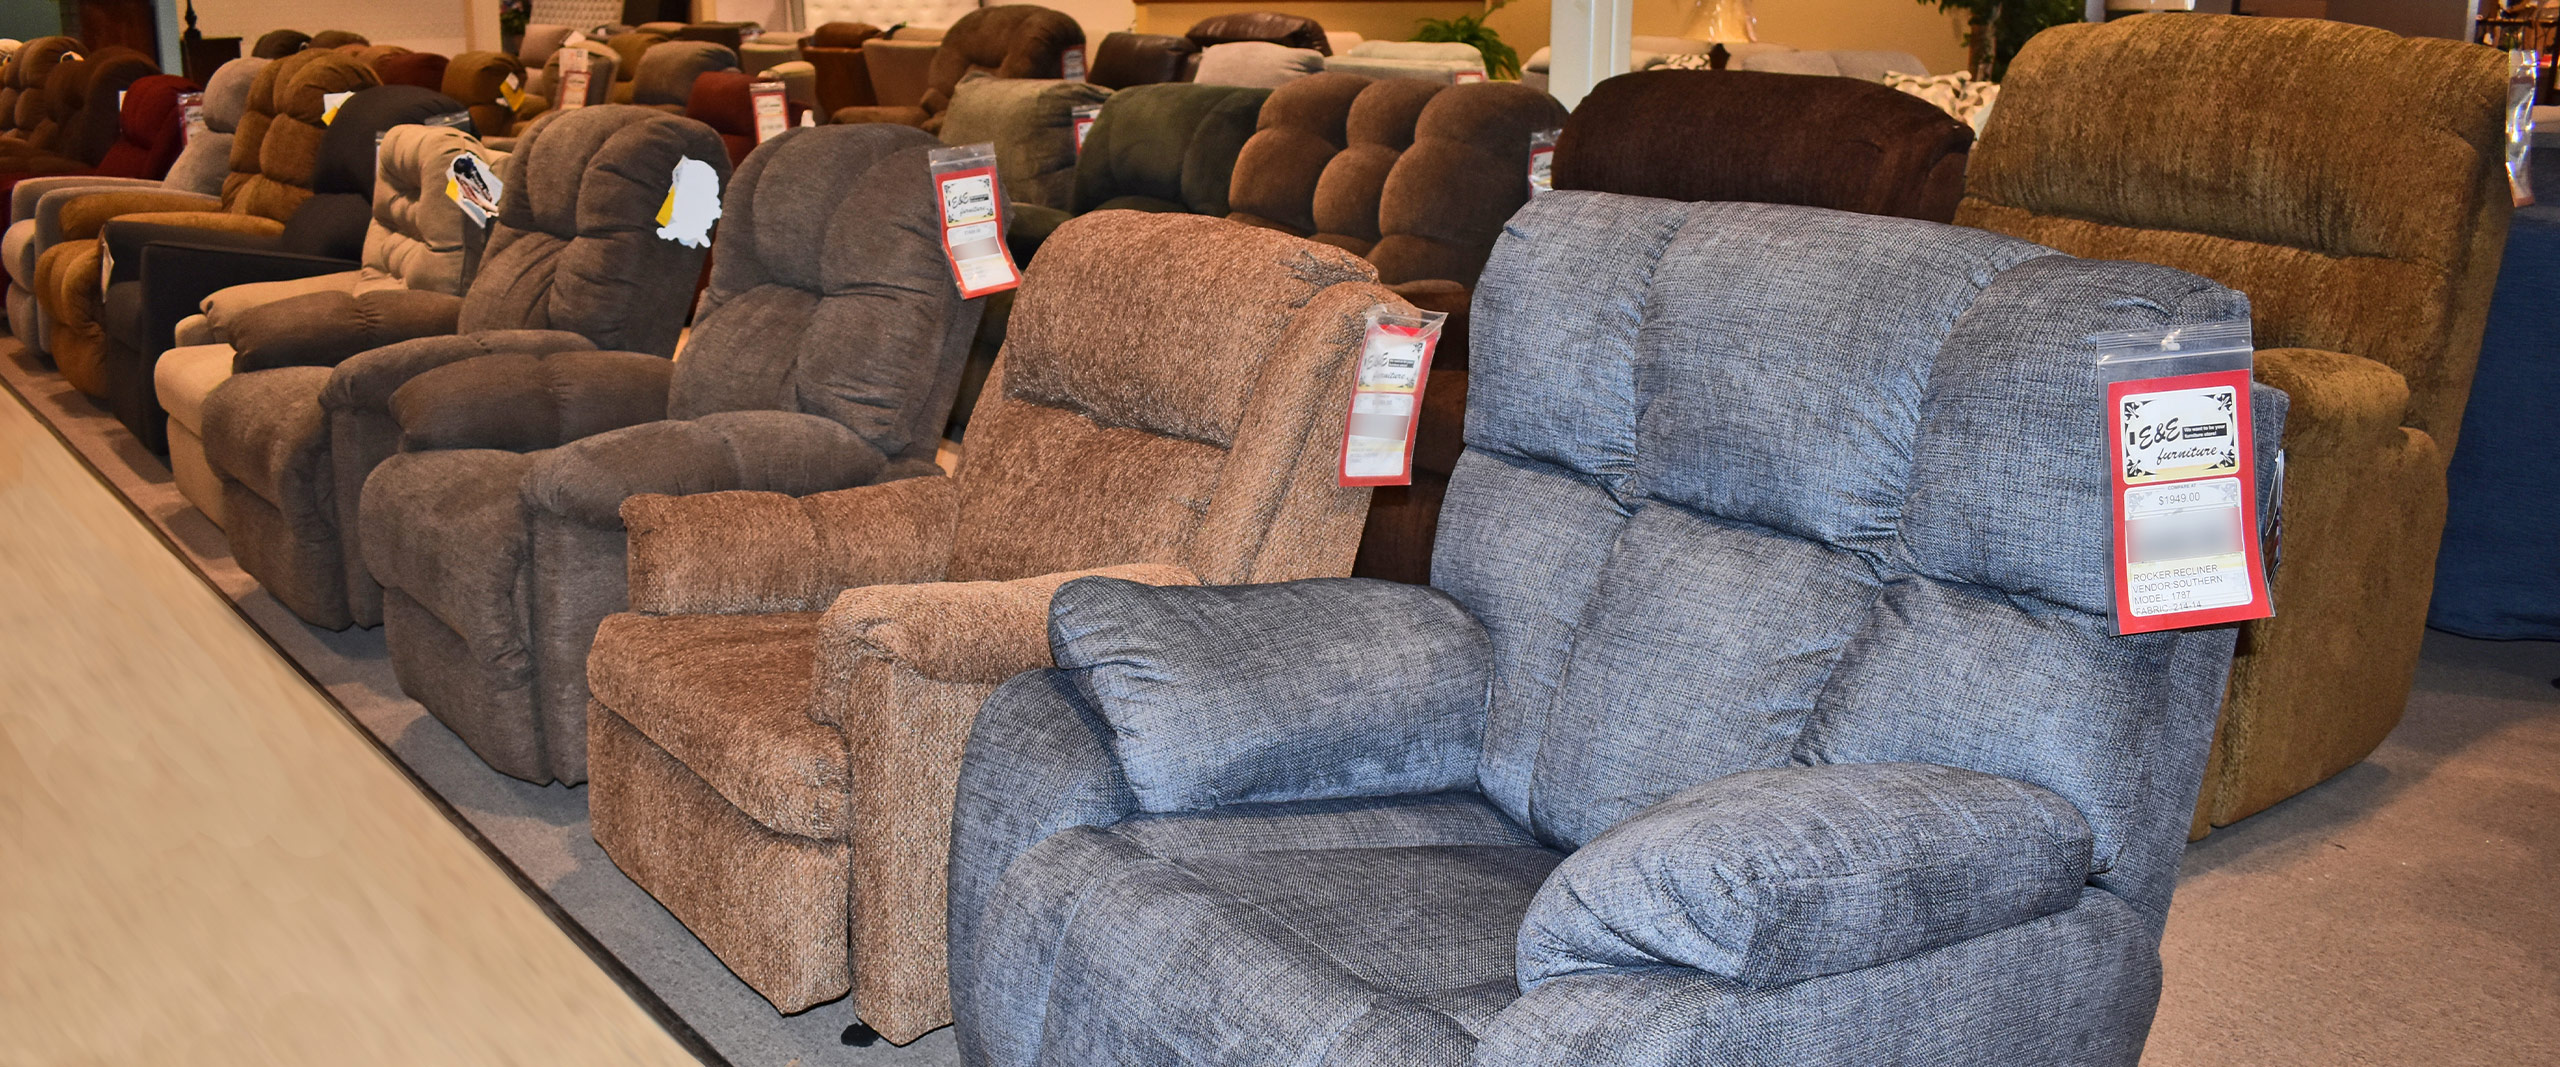 Large Selection of Best Made Recliners